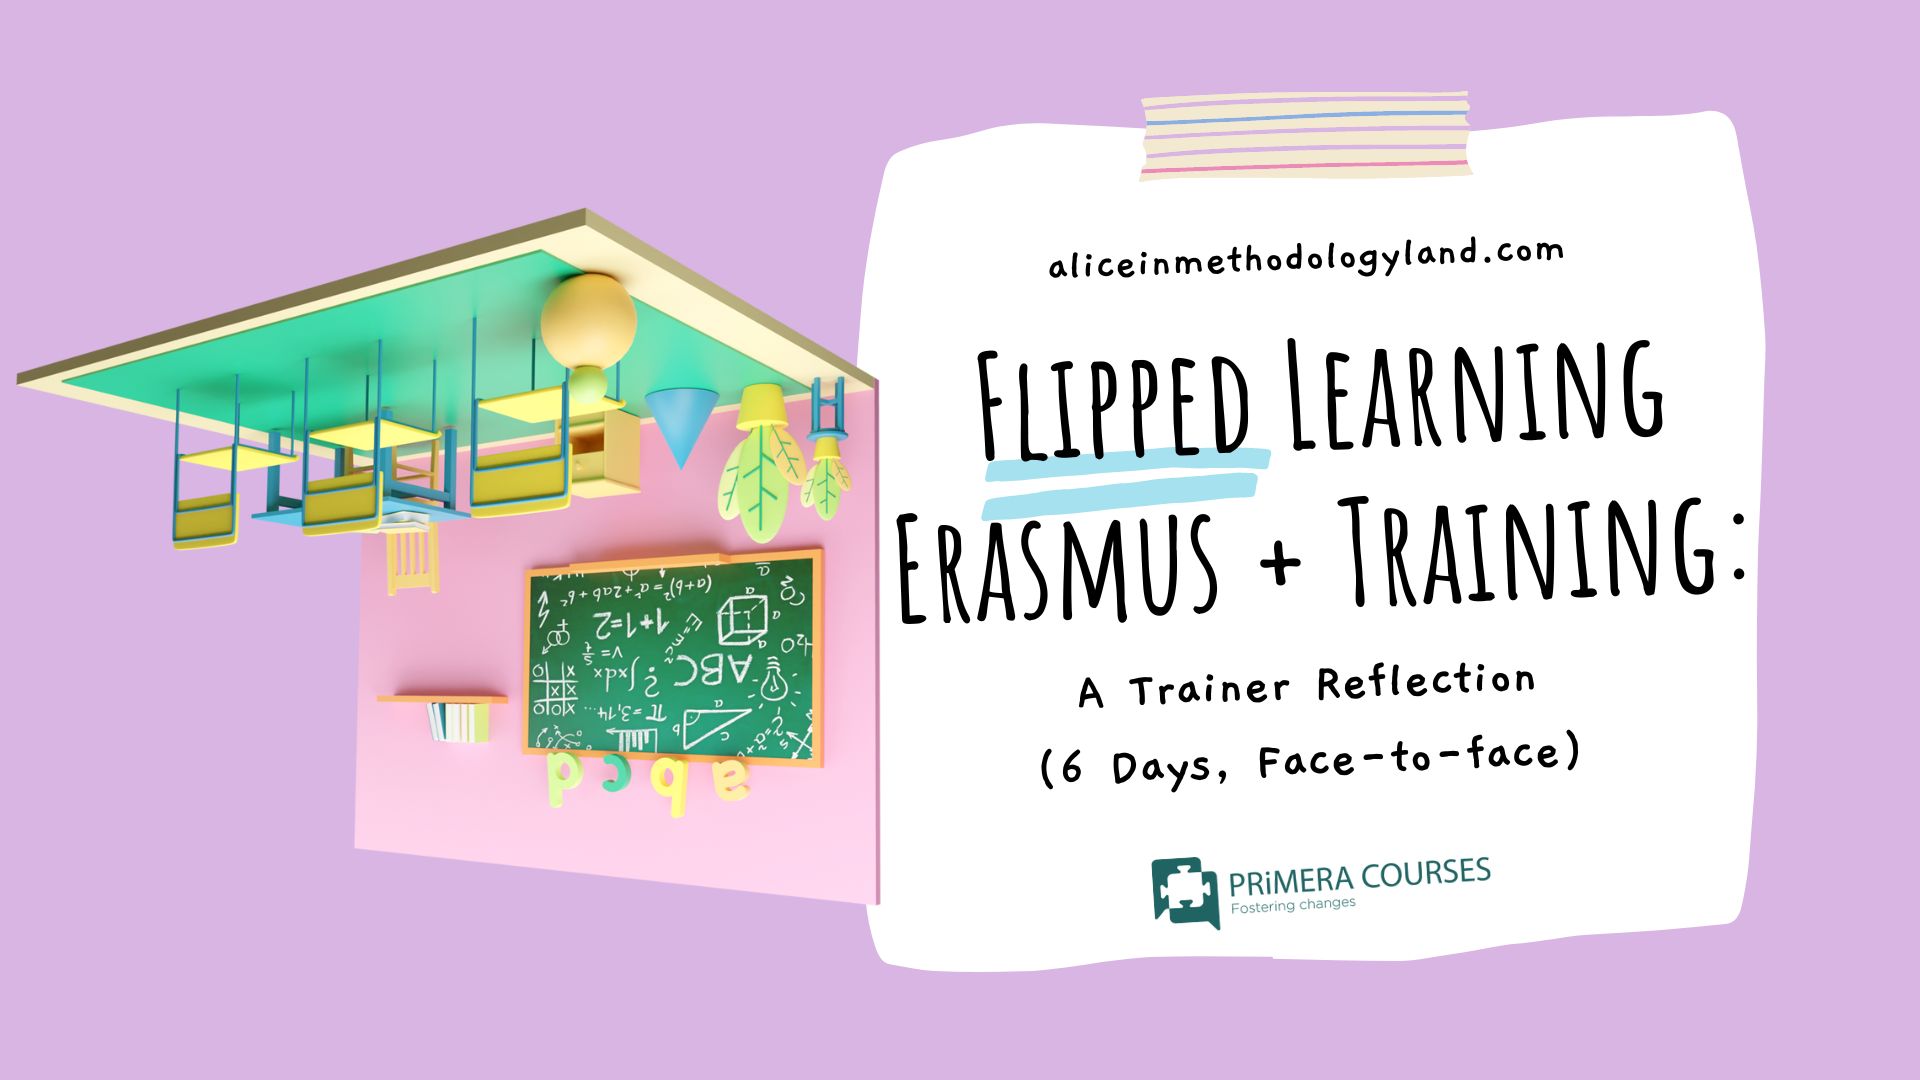 Flipped Learning Erasmus + Training: A Trainer Reflection (6 Days, Face-to-face)